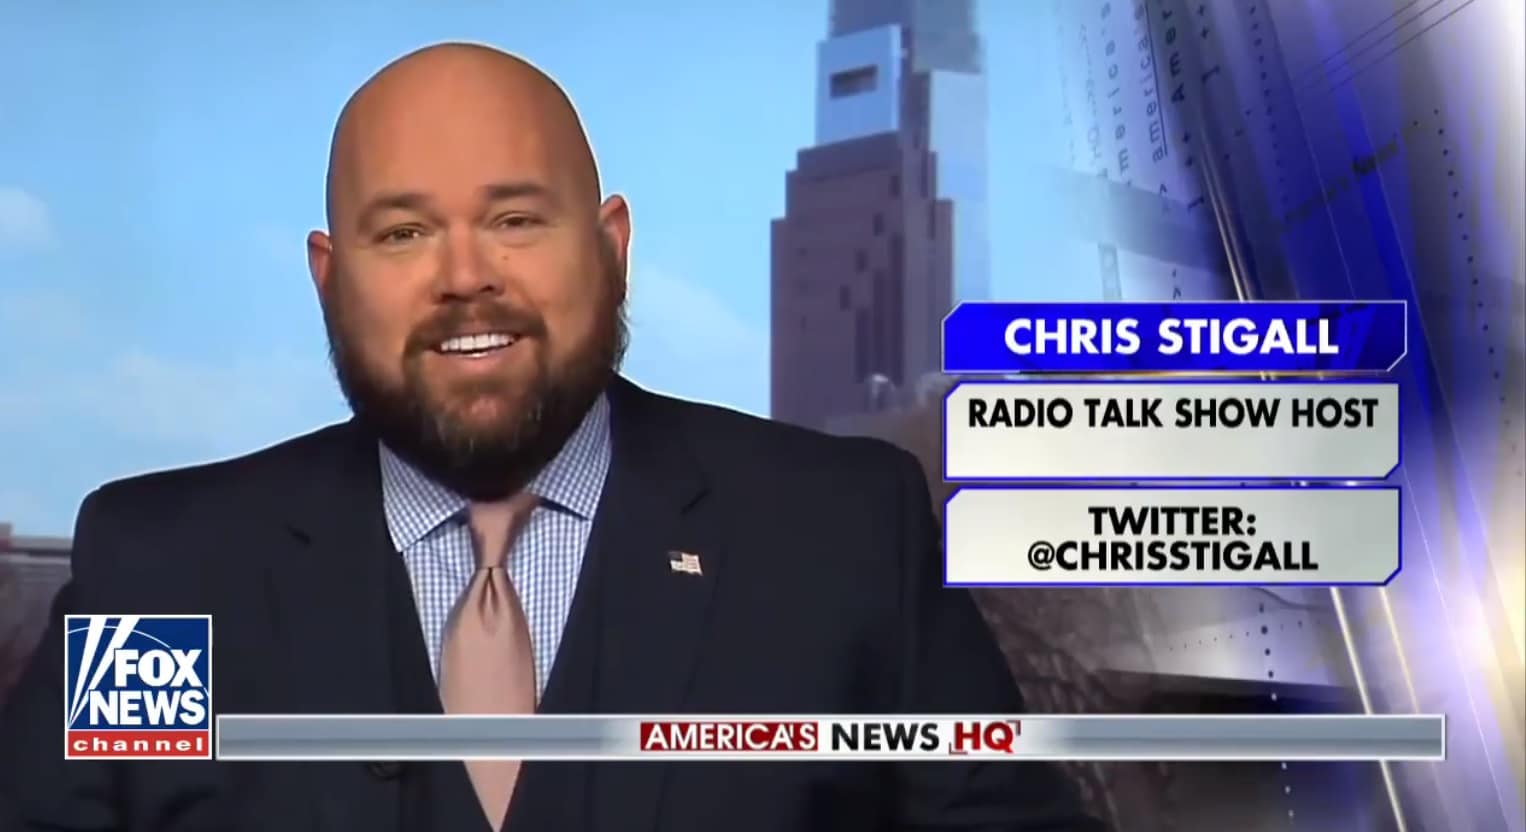 Conservative radio host Chris Stigall has appeared on Fox News before